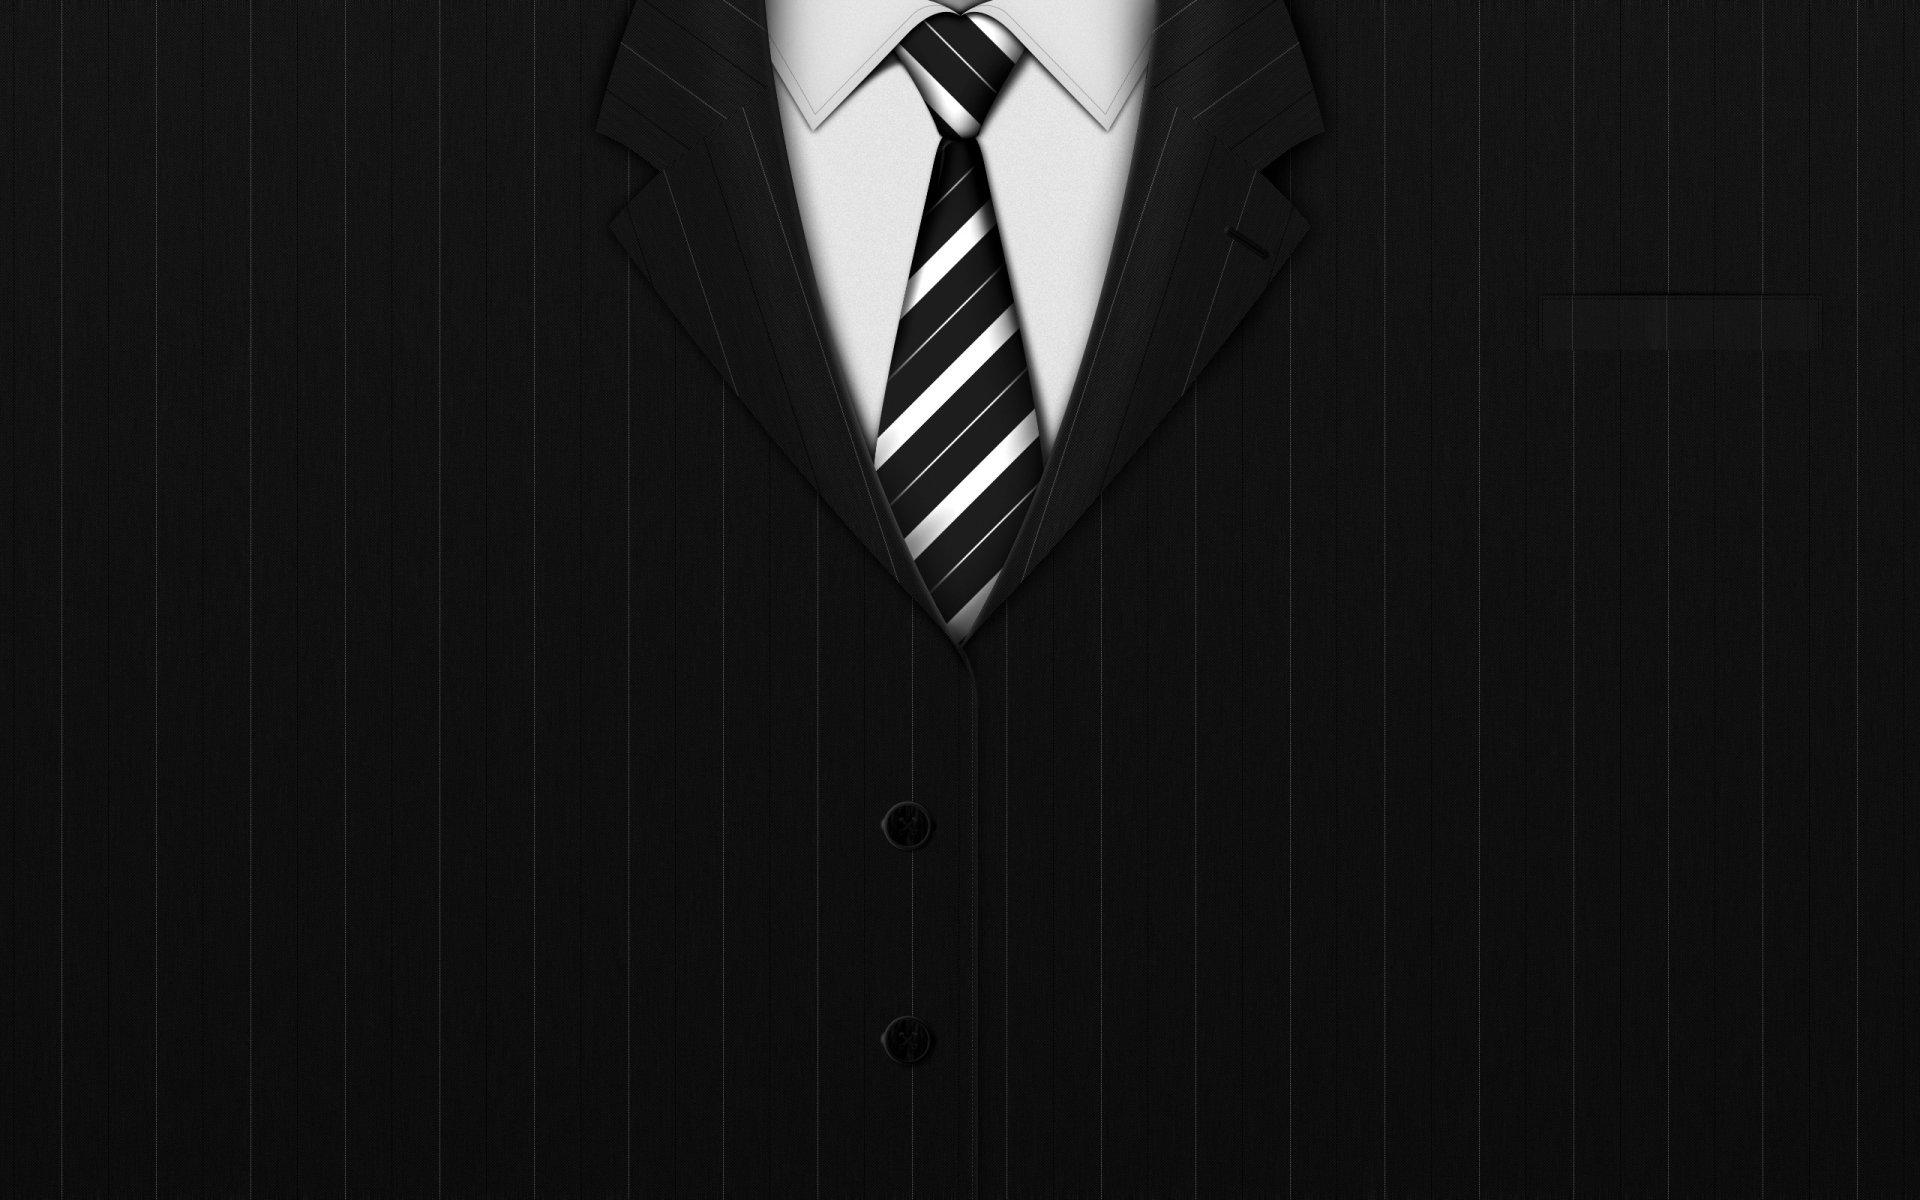 Suits Wallpapers